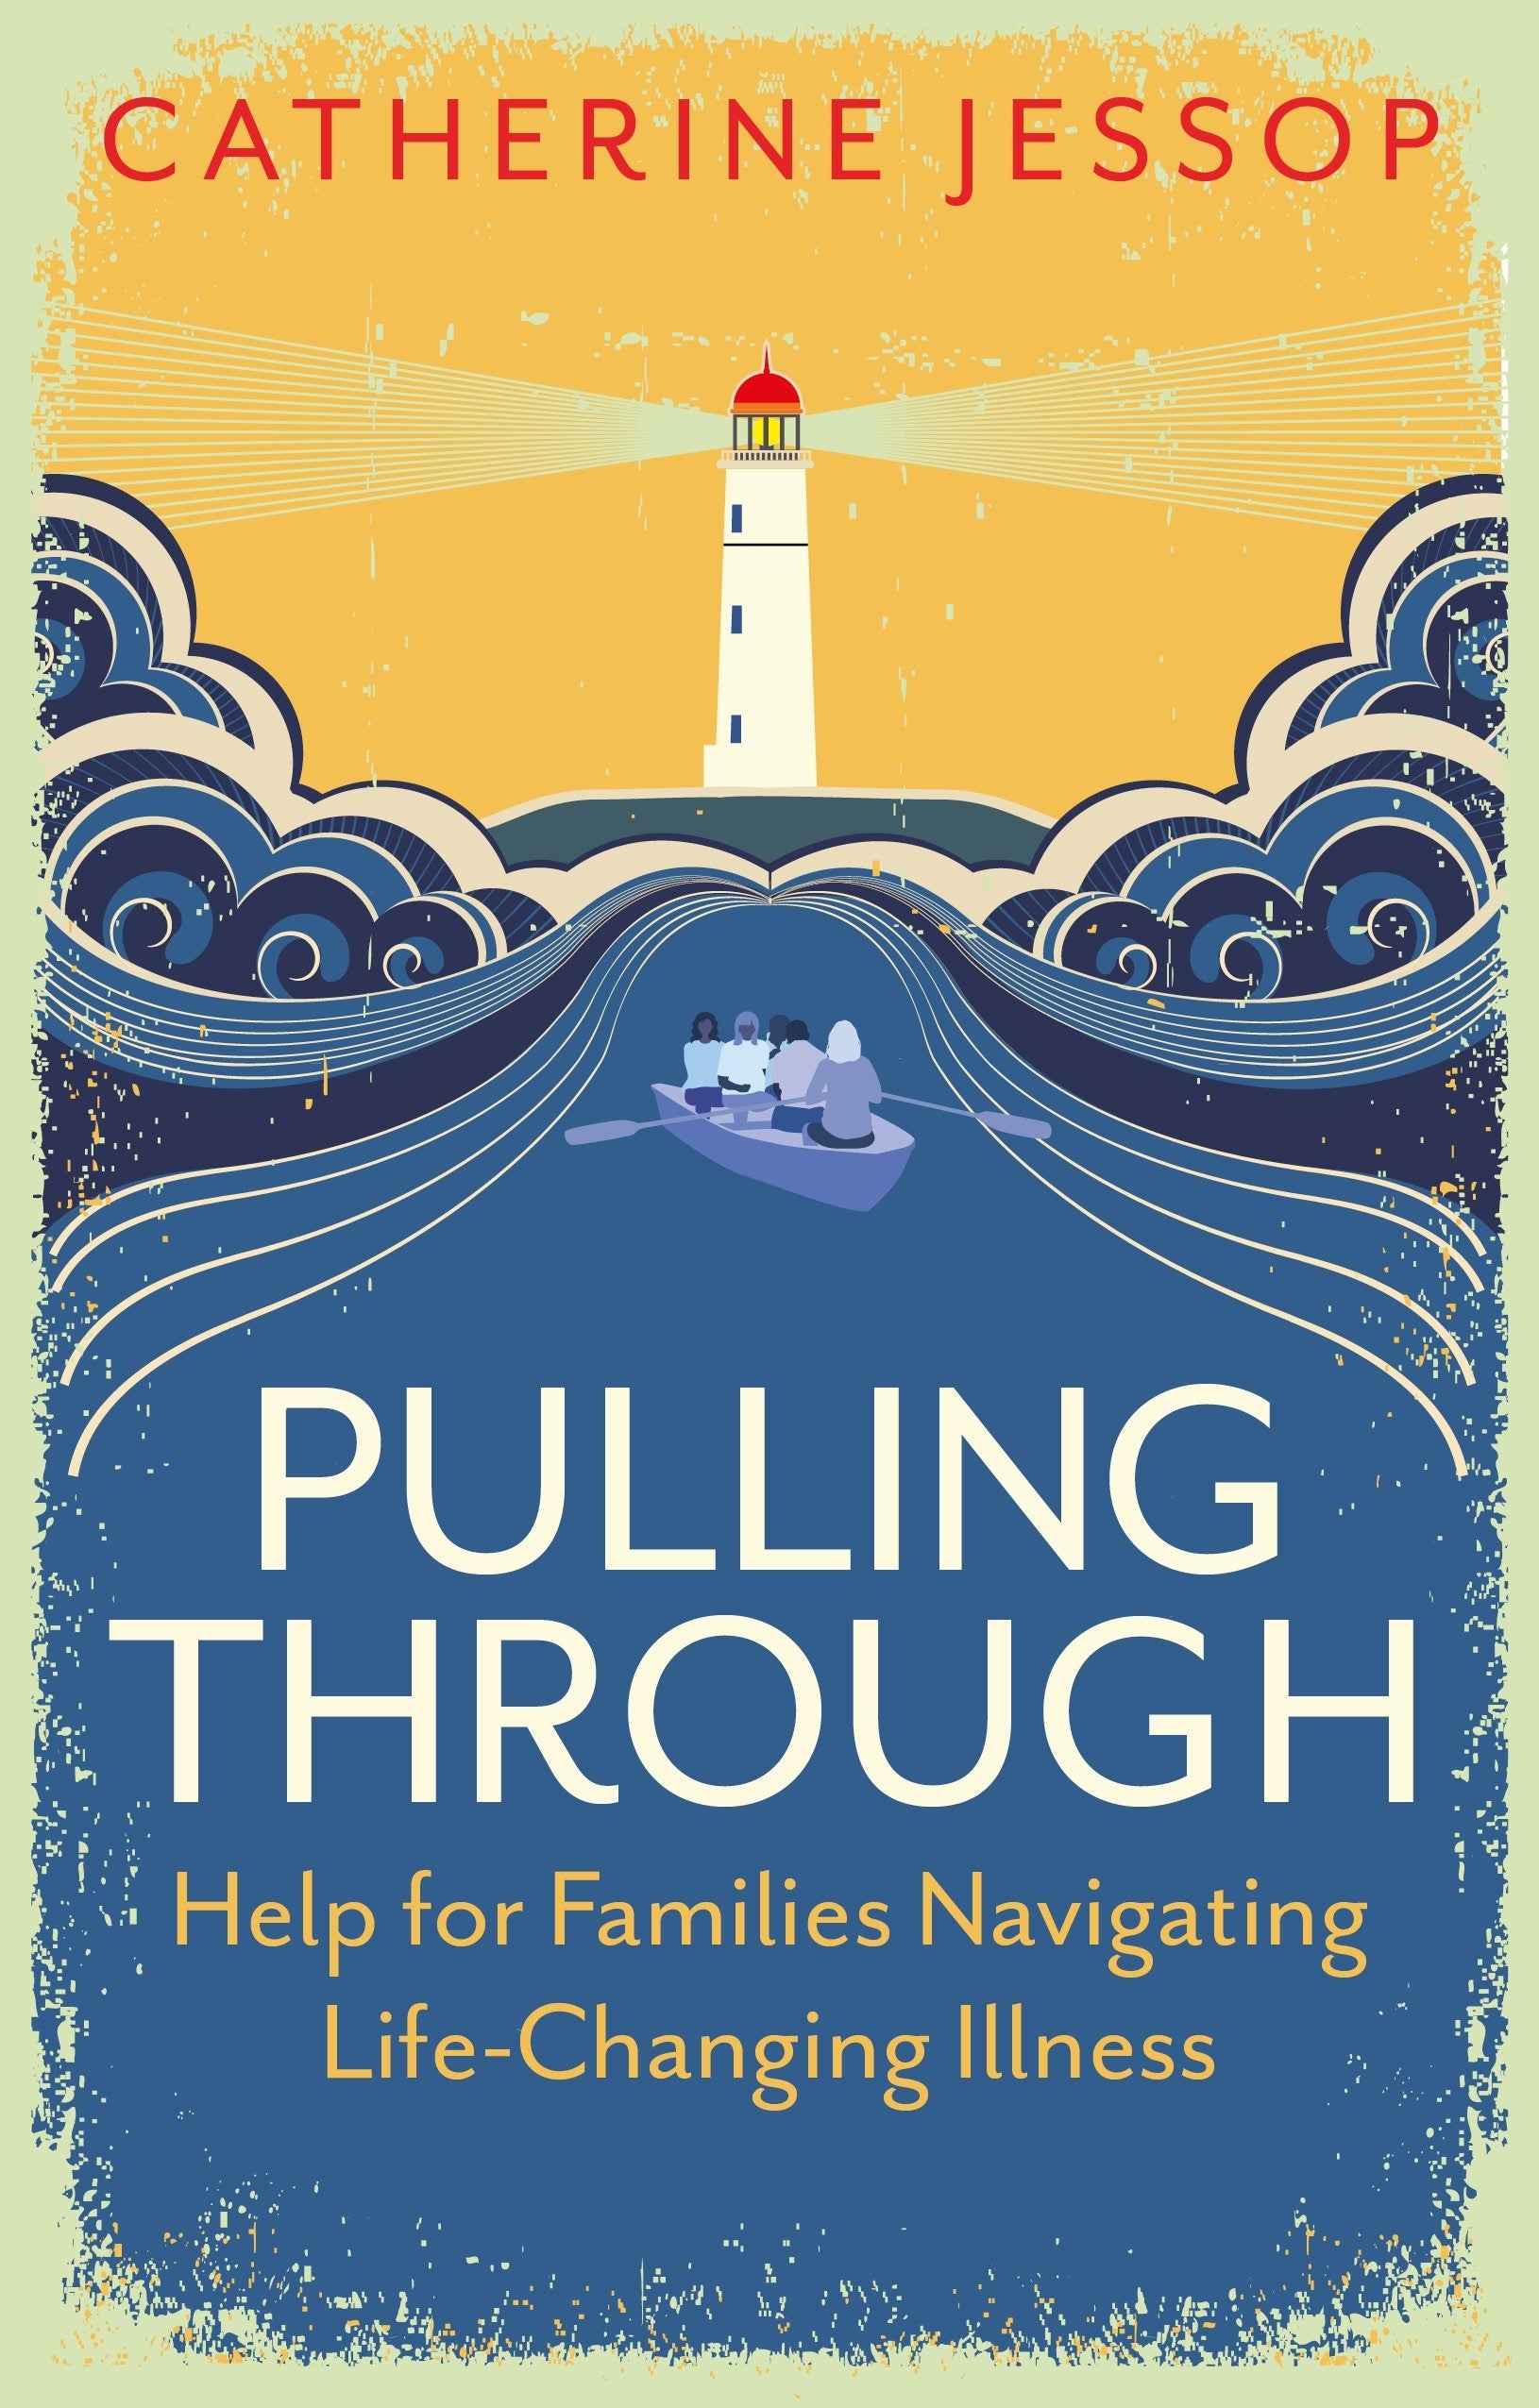 Pulling Through by Catherine Jessop